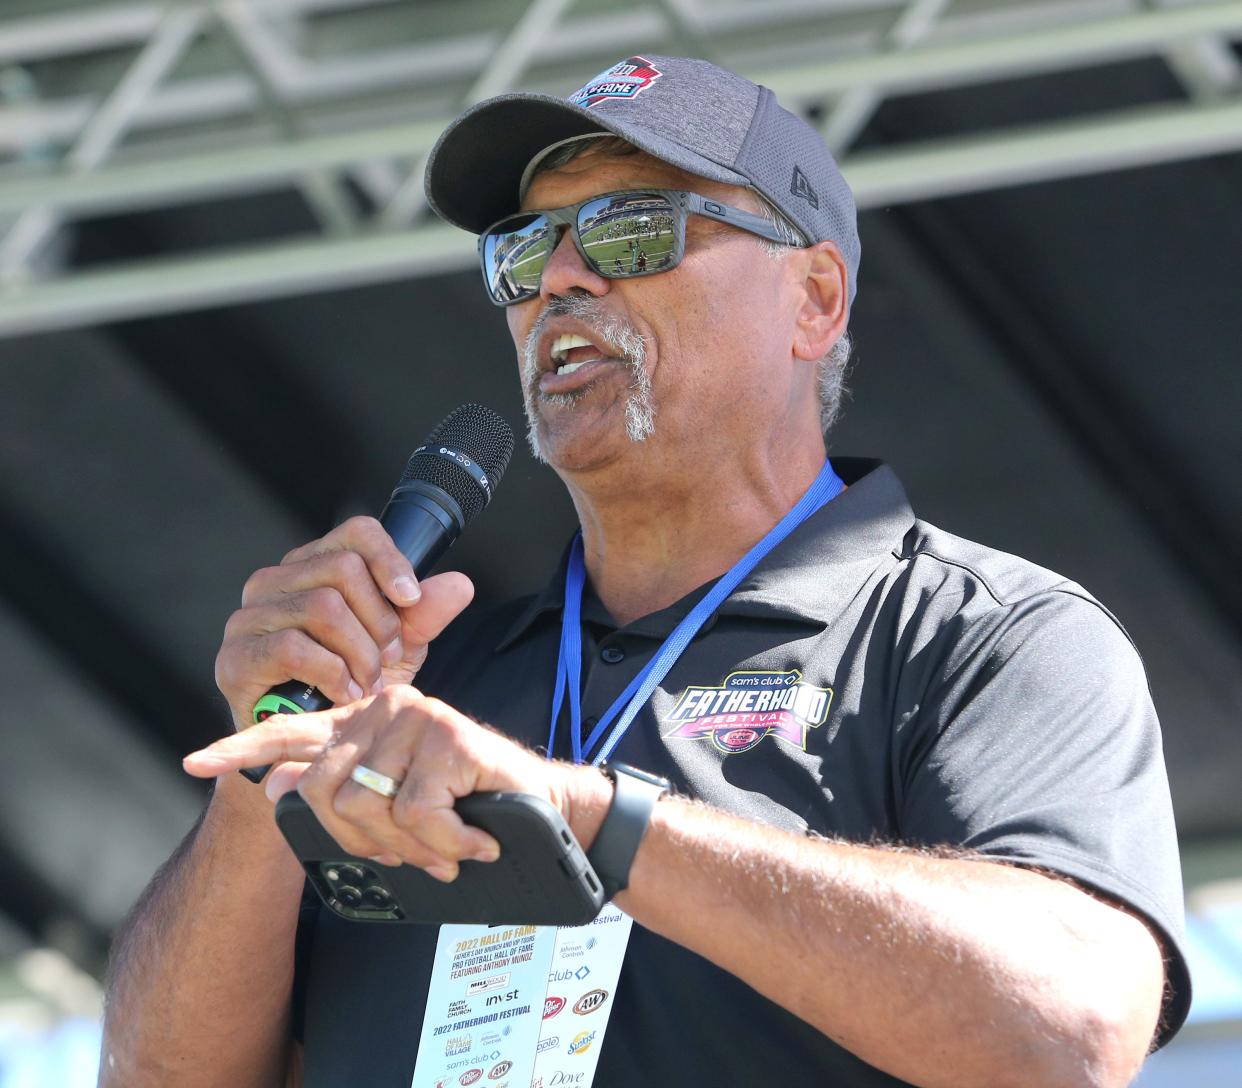 Former NFL great Anthony Munoz speaks Saturday during the three-day Hall of Fame Village Fatherhood Festival at Tom Benson Hall of Fame Stadium.